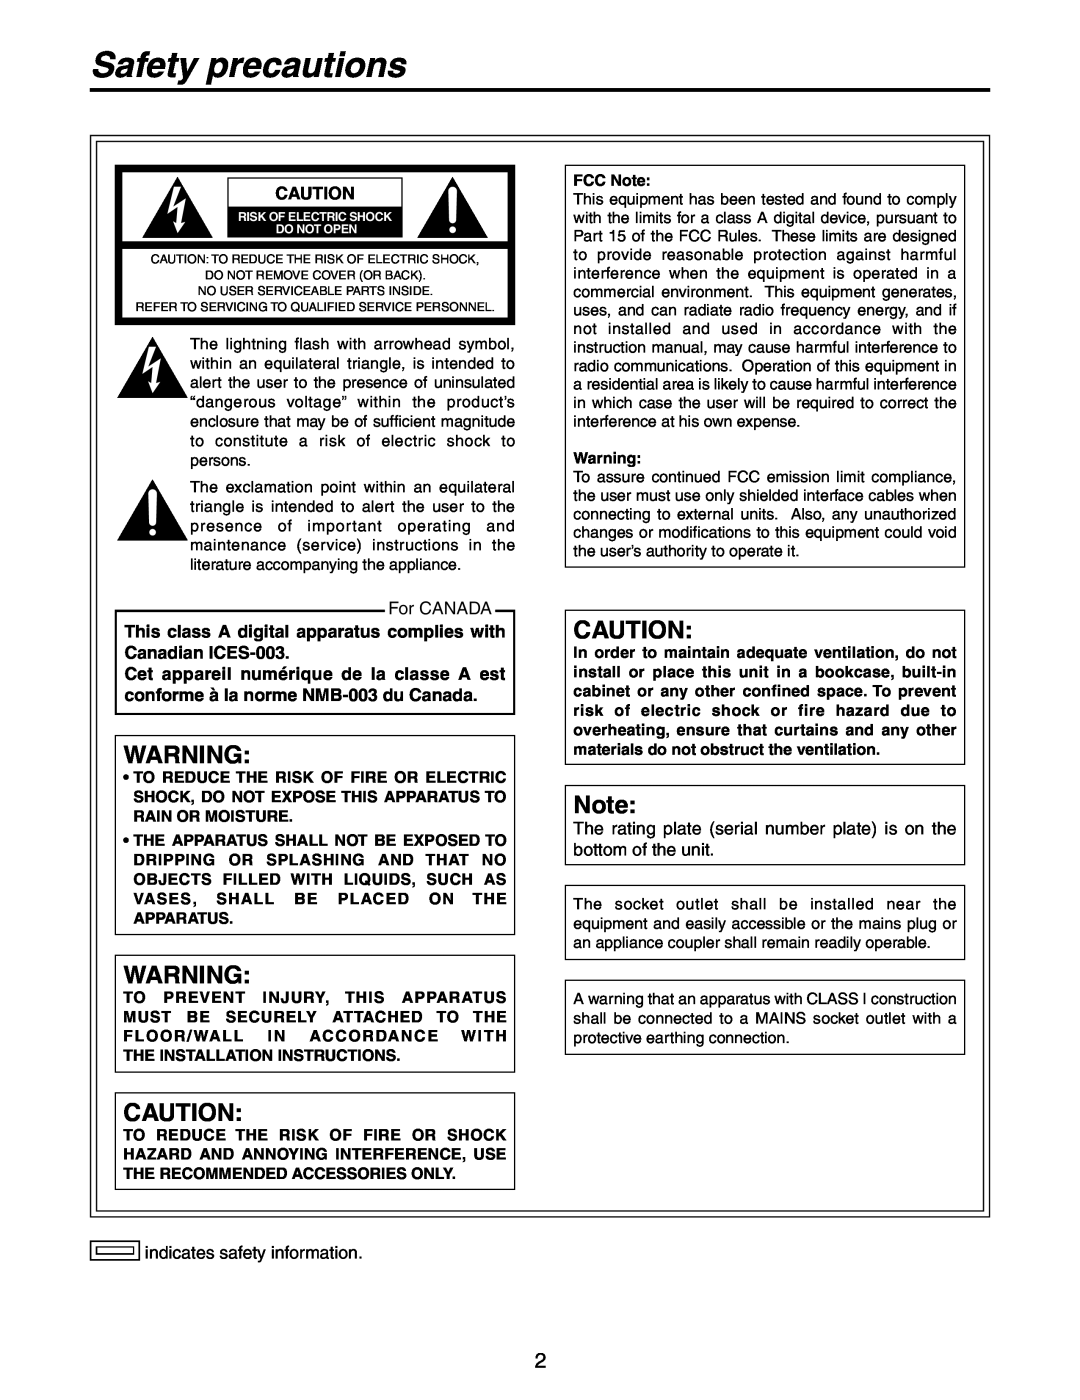 Panasonic AW-RP555N manual Safety precautions, For CANADA, indicates safety information 